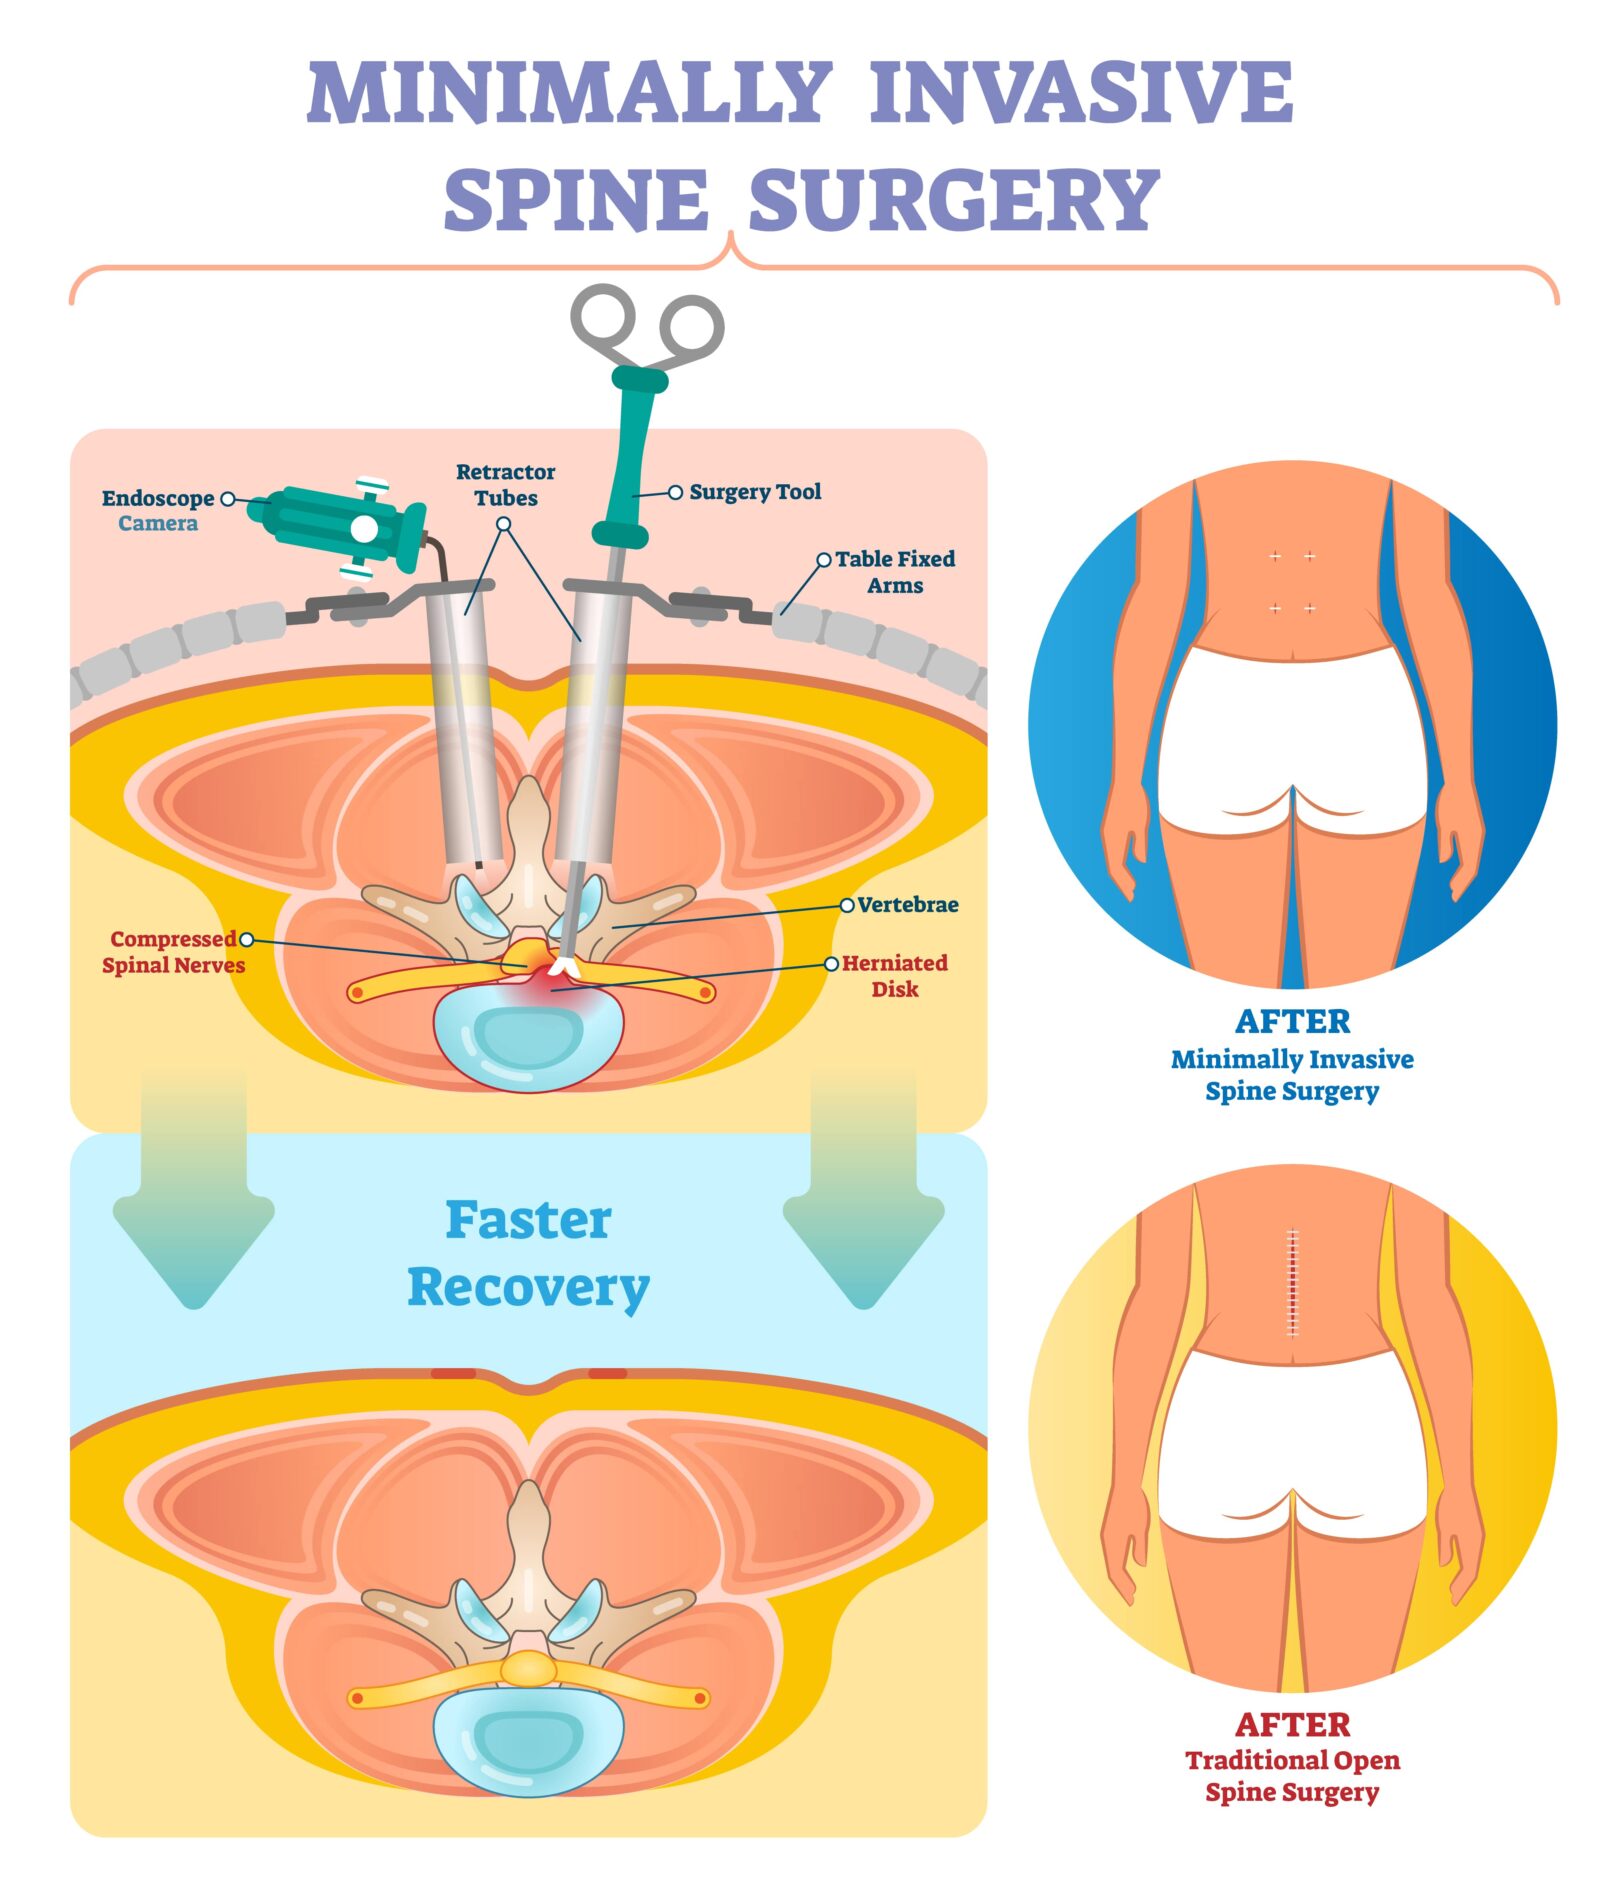 Minimally invasive spine surgery vector illustration. Labeled medical diagram with endoscope camera, retractor tubes, tool, table fixed arms and compressed spinal nerves.